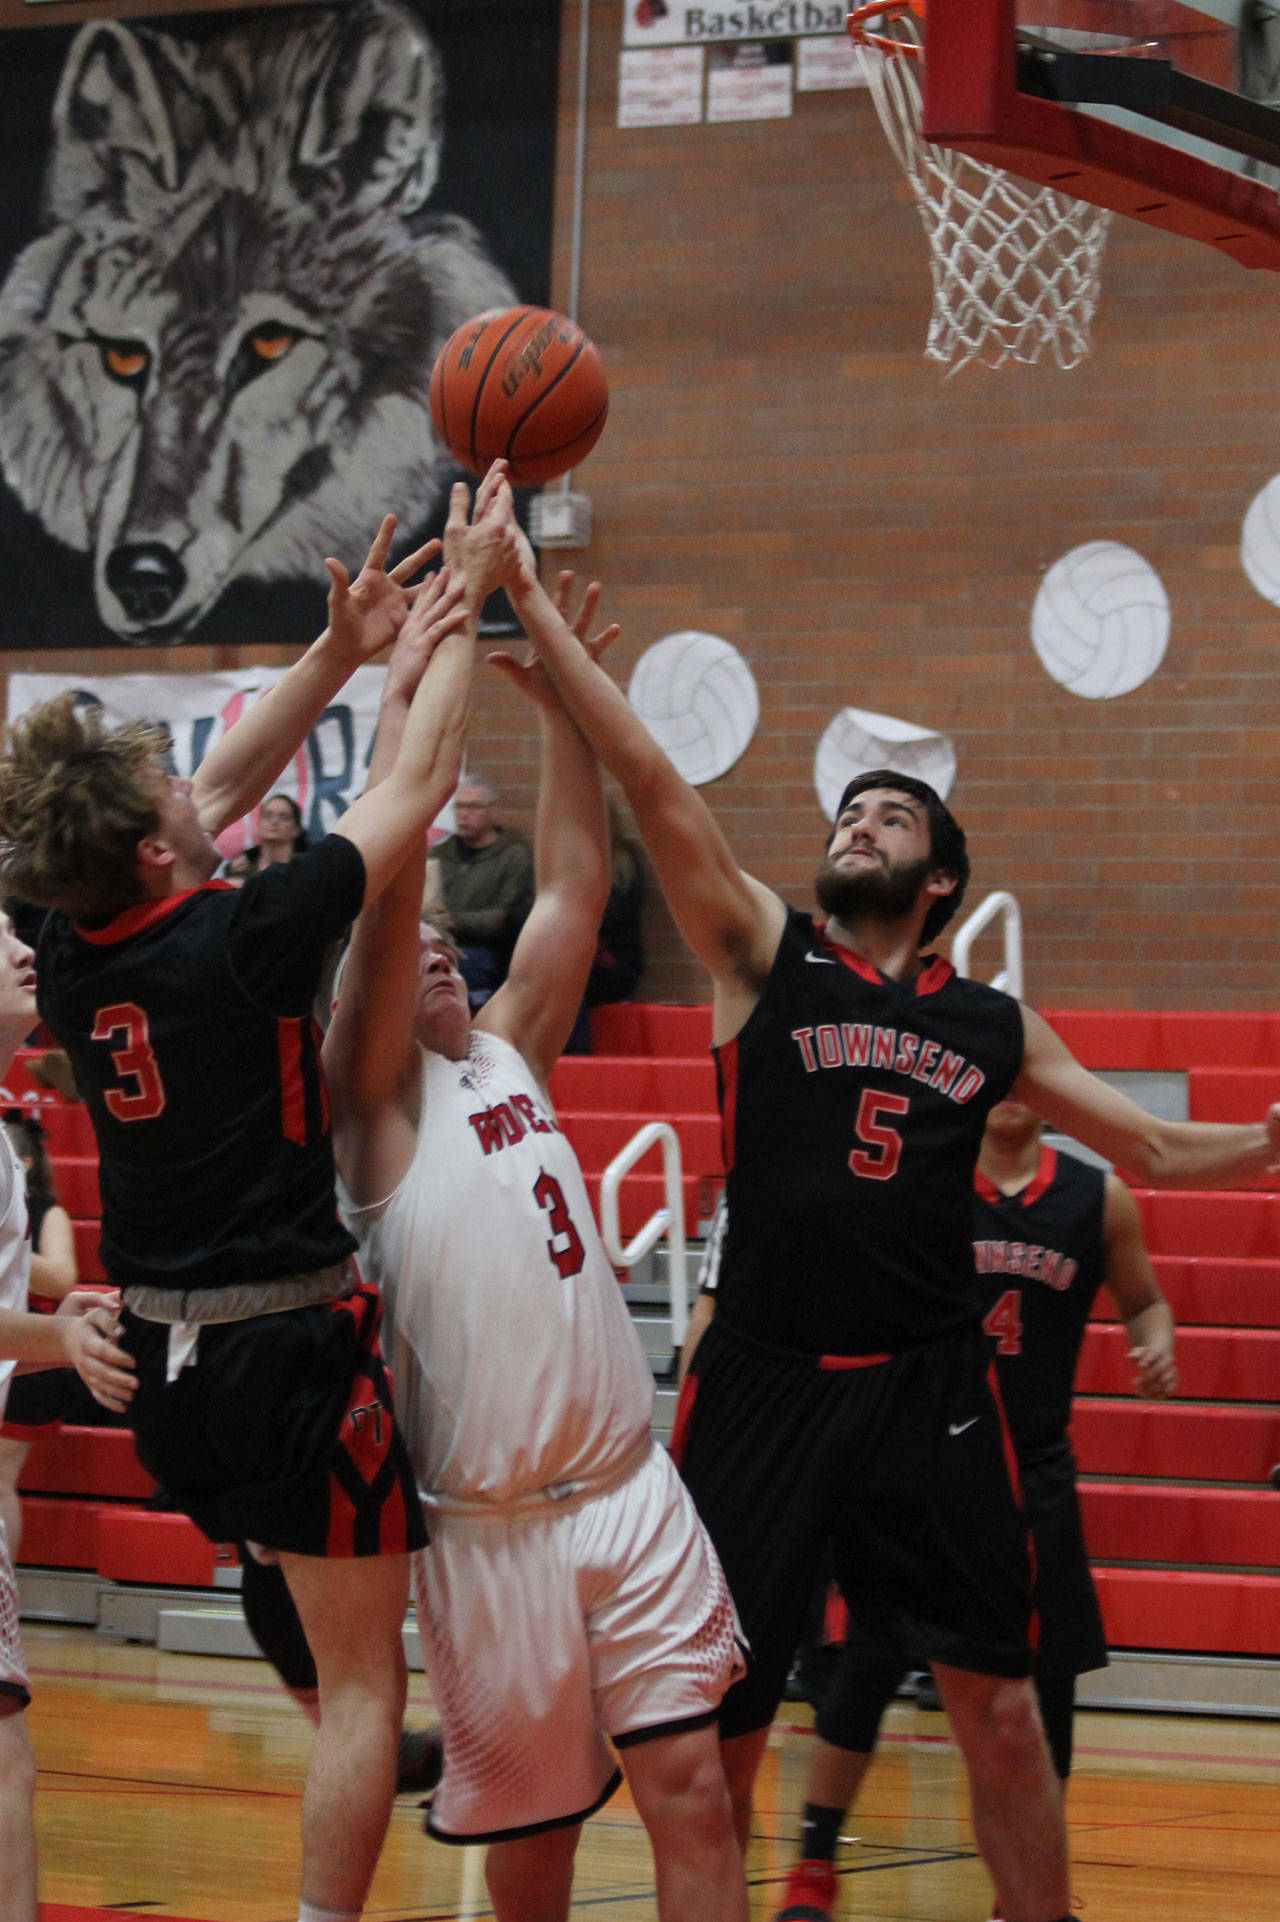 Coupeville’s Hunter Downes (3) battles taller Port Townsend players for a rebound in Tuesday’s win. (Photo by Jim Waller/Whidbey News-Times)